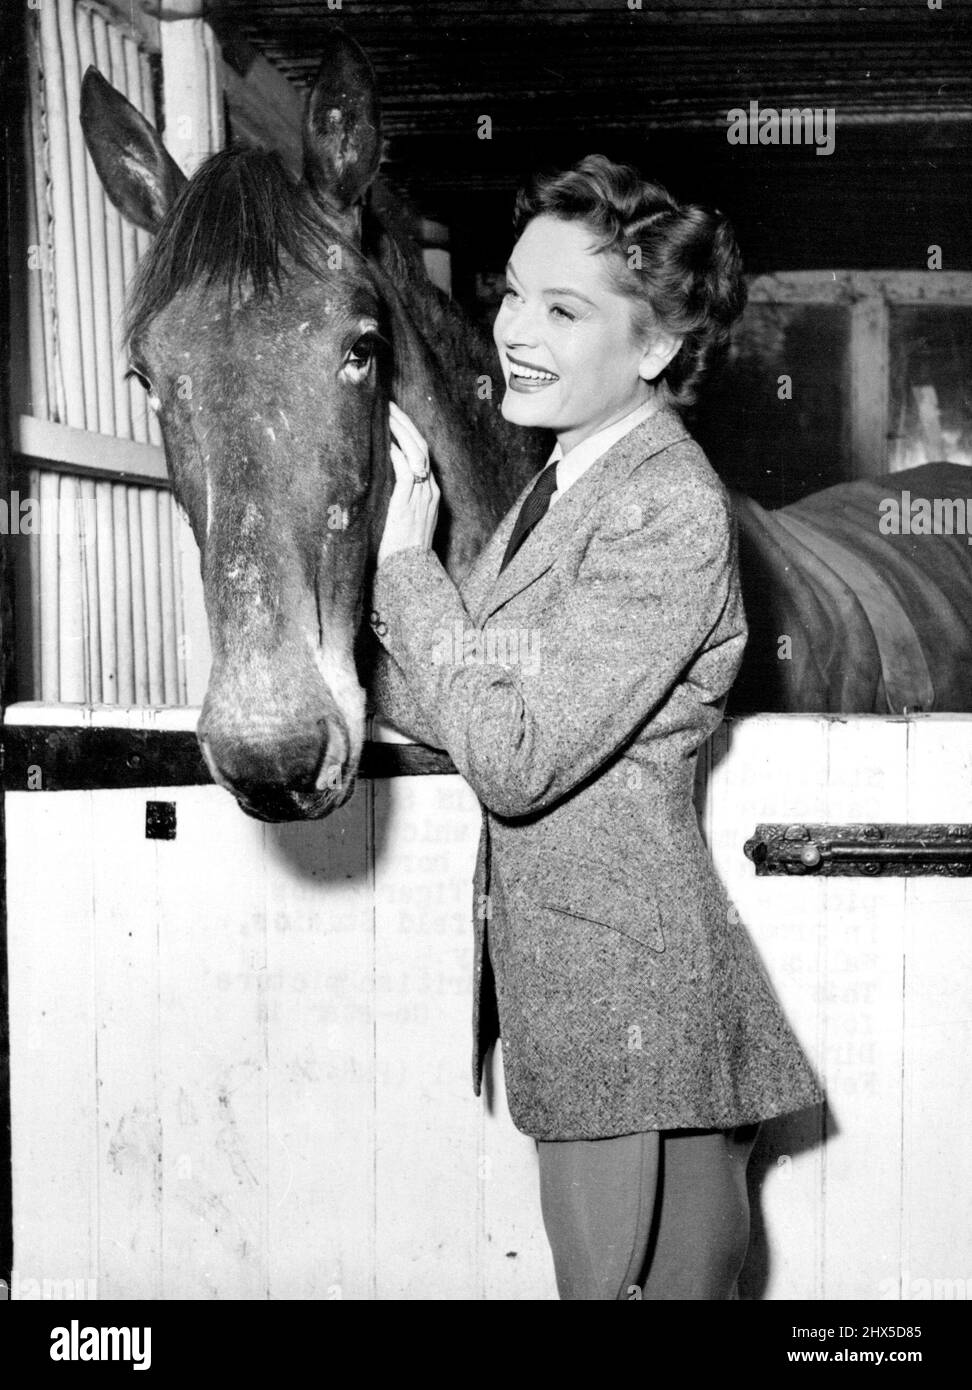 Star Rider -- Stable-door introduction for lovely Canadian film star Alexis Smith and the bay mare, Bridget, which she rides in many scenes of her new picture, 'the sleeping tiger', now in production at Nettlefold Studios, Walton-on-Thames, Surrey. This is Alexis' first British picture for Insignia films. Co-star is Dirk Bogarde. February 26, 1954. (Photo by Reuterphoto). Stock Photo